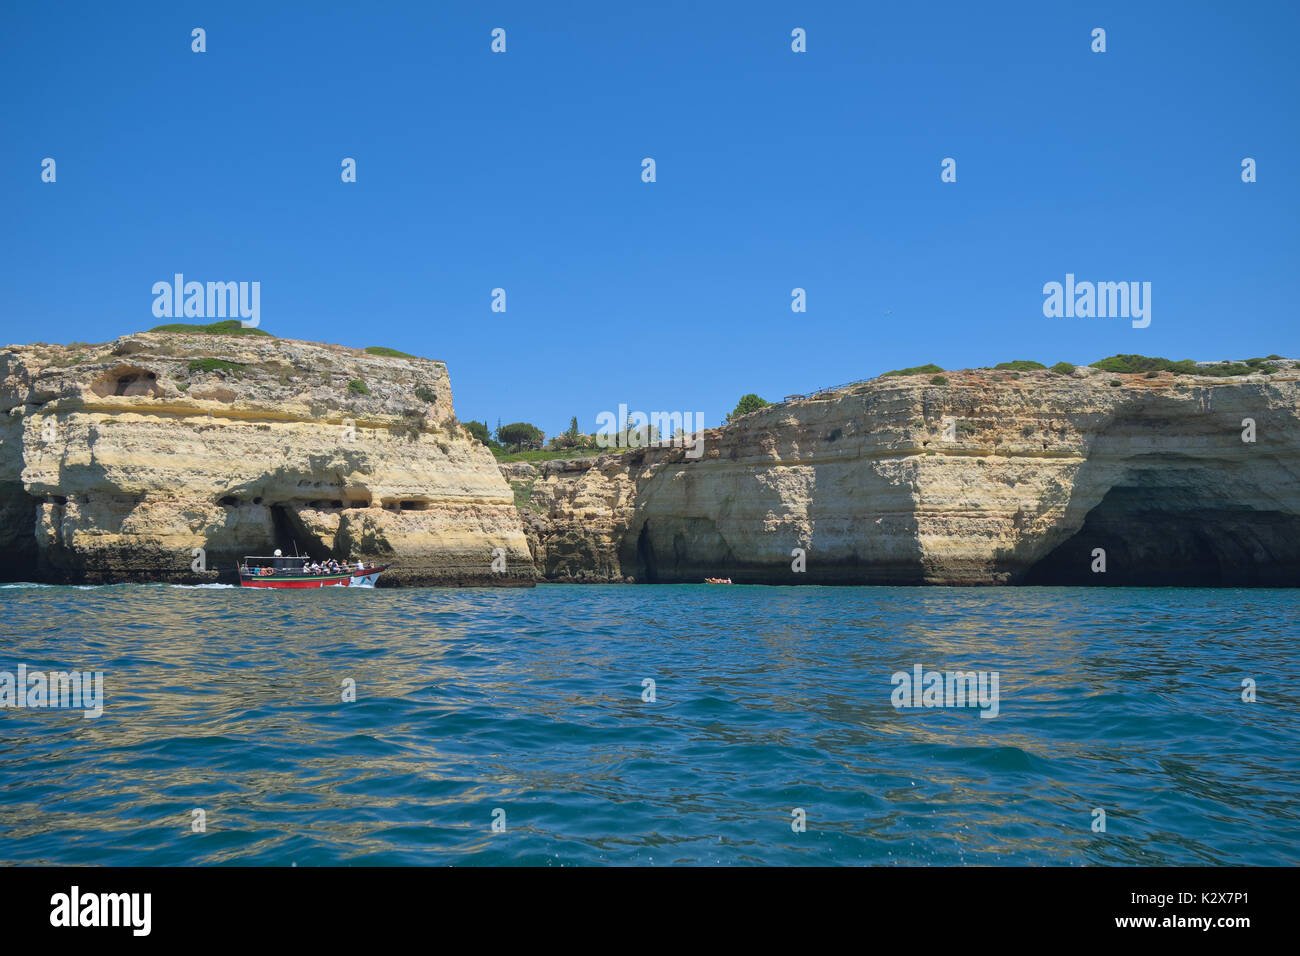 Tour boats visiting Carvoeiro caves and cliffs. Travel and vacation destinations Stock Photo